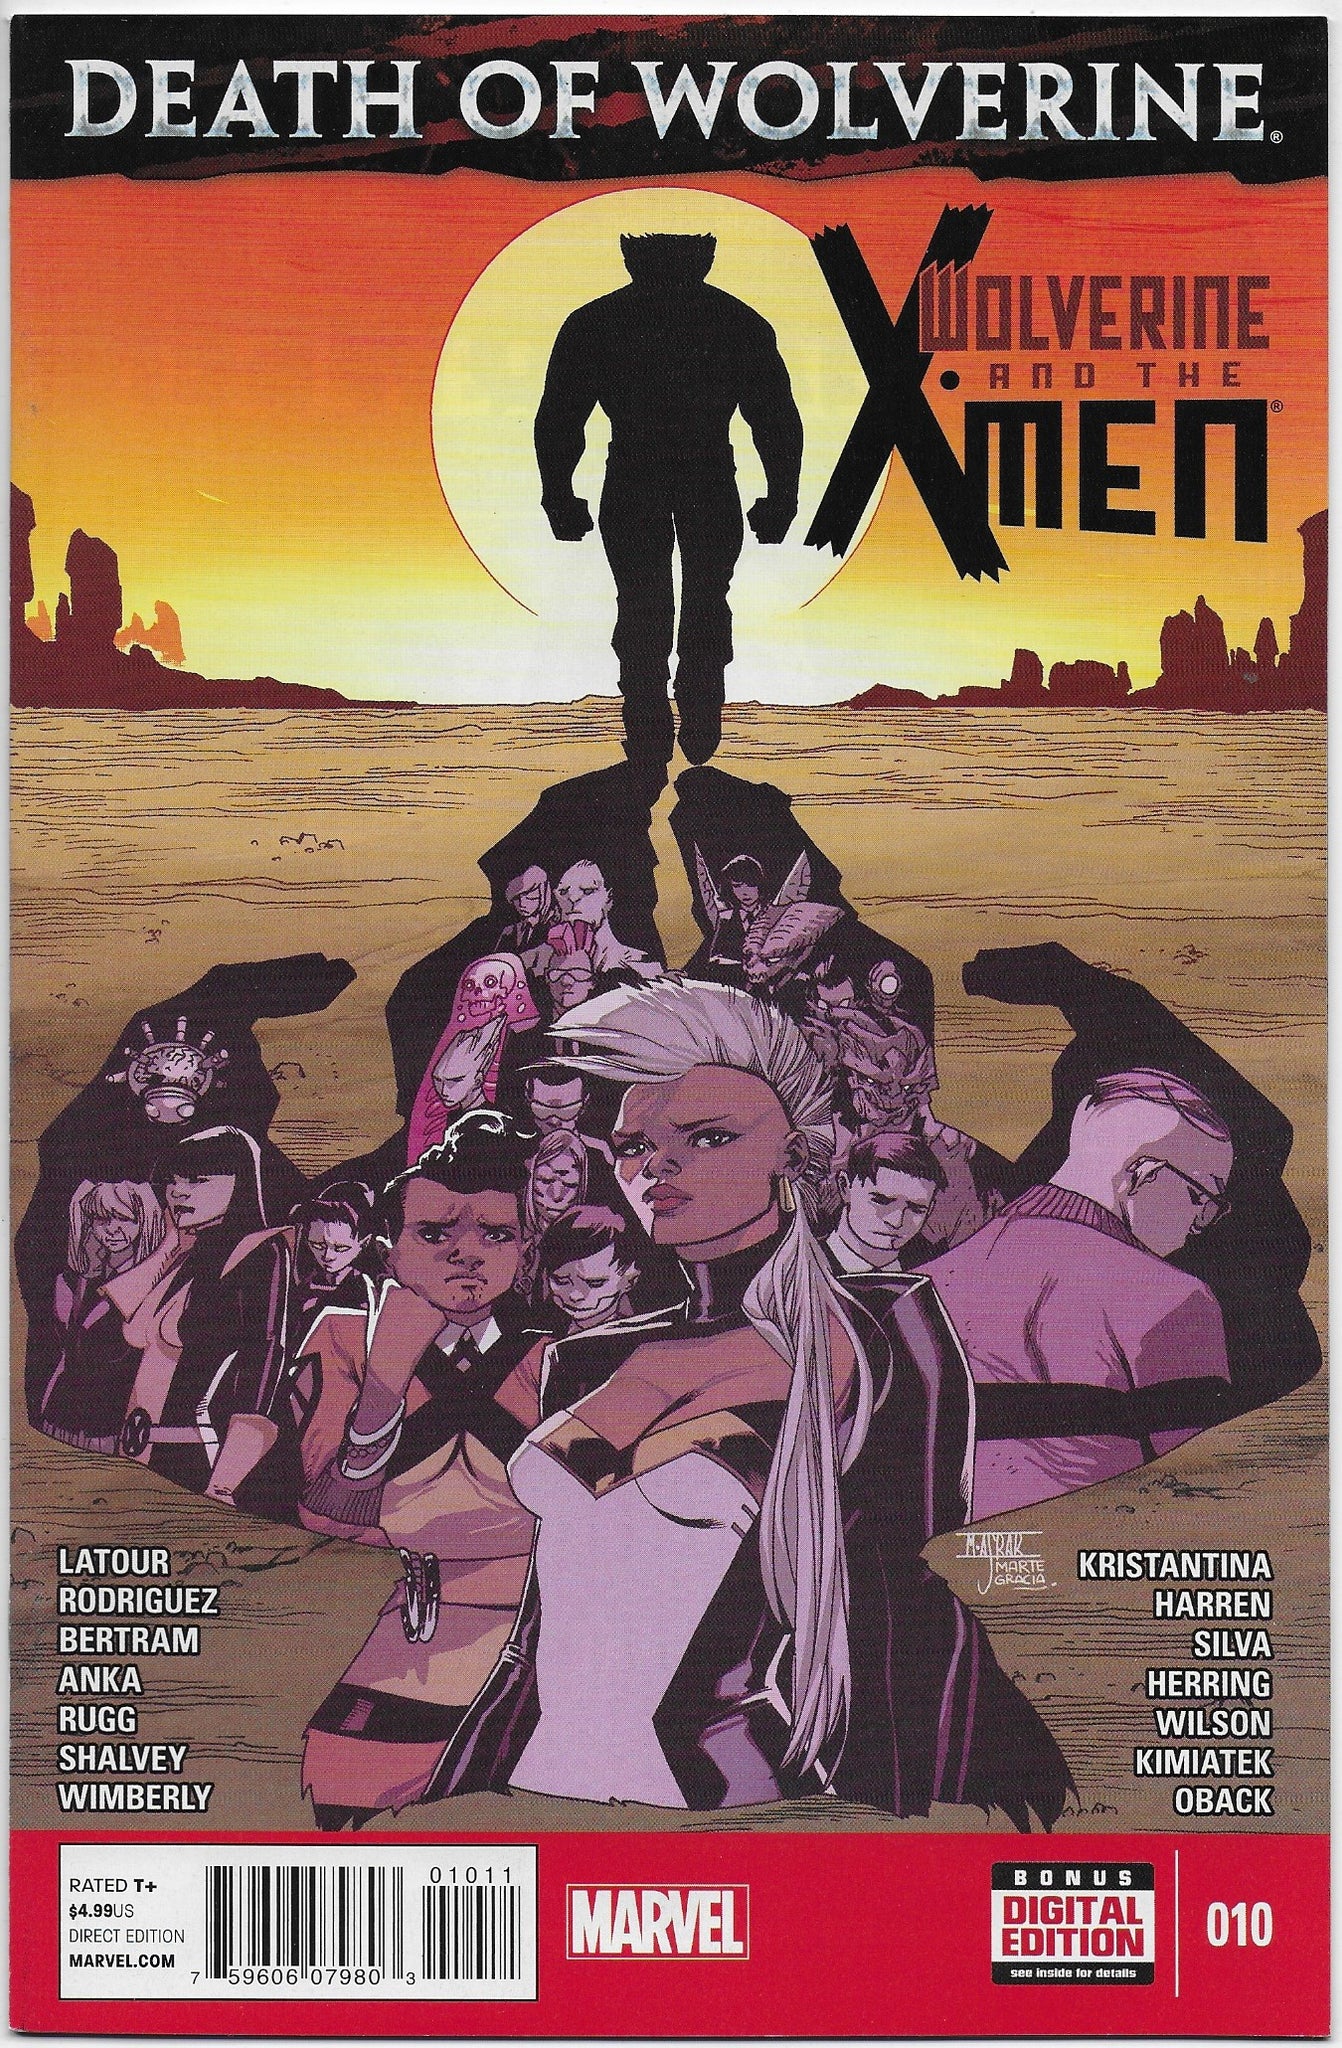 wolverine and the x-men